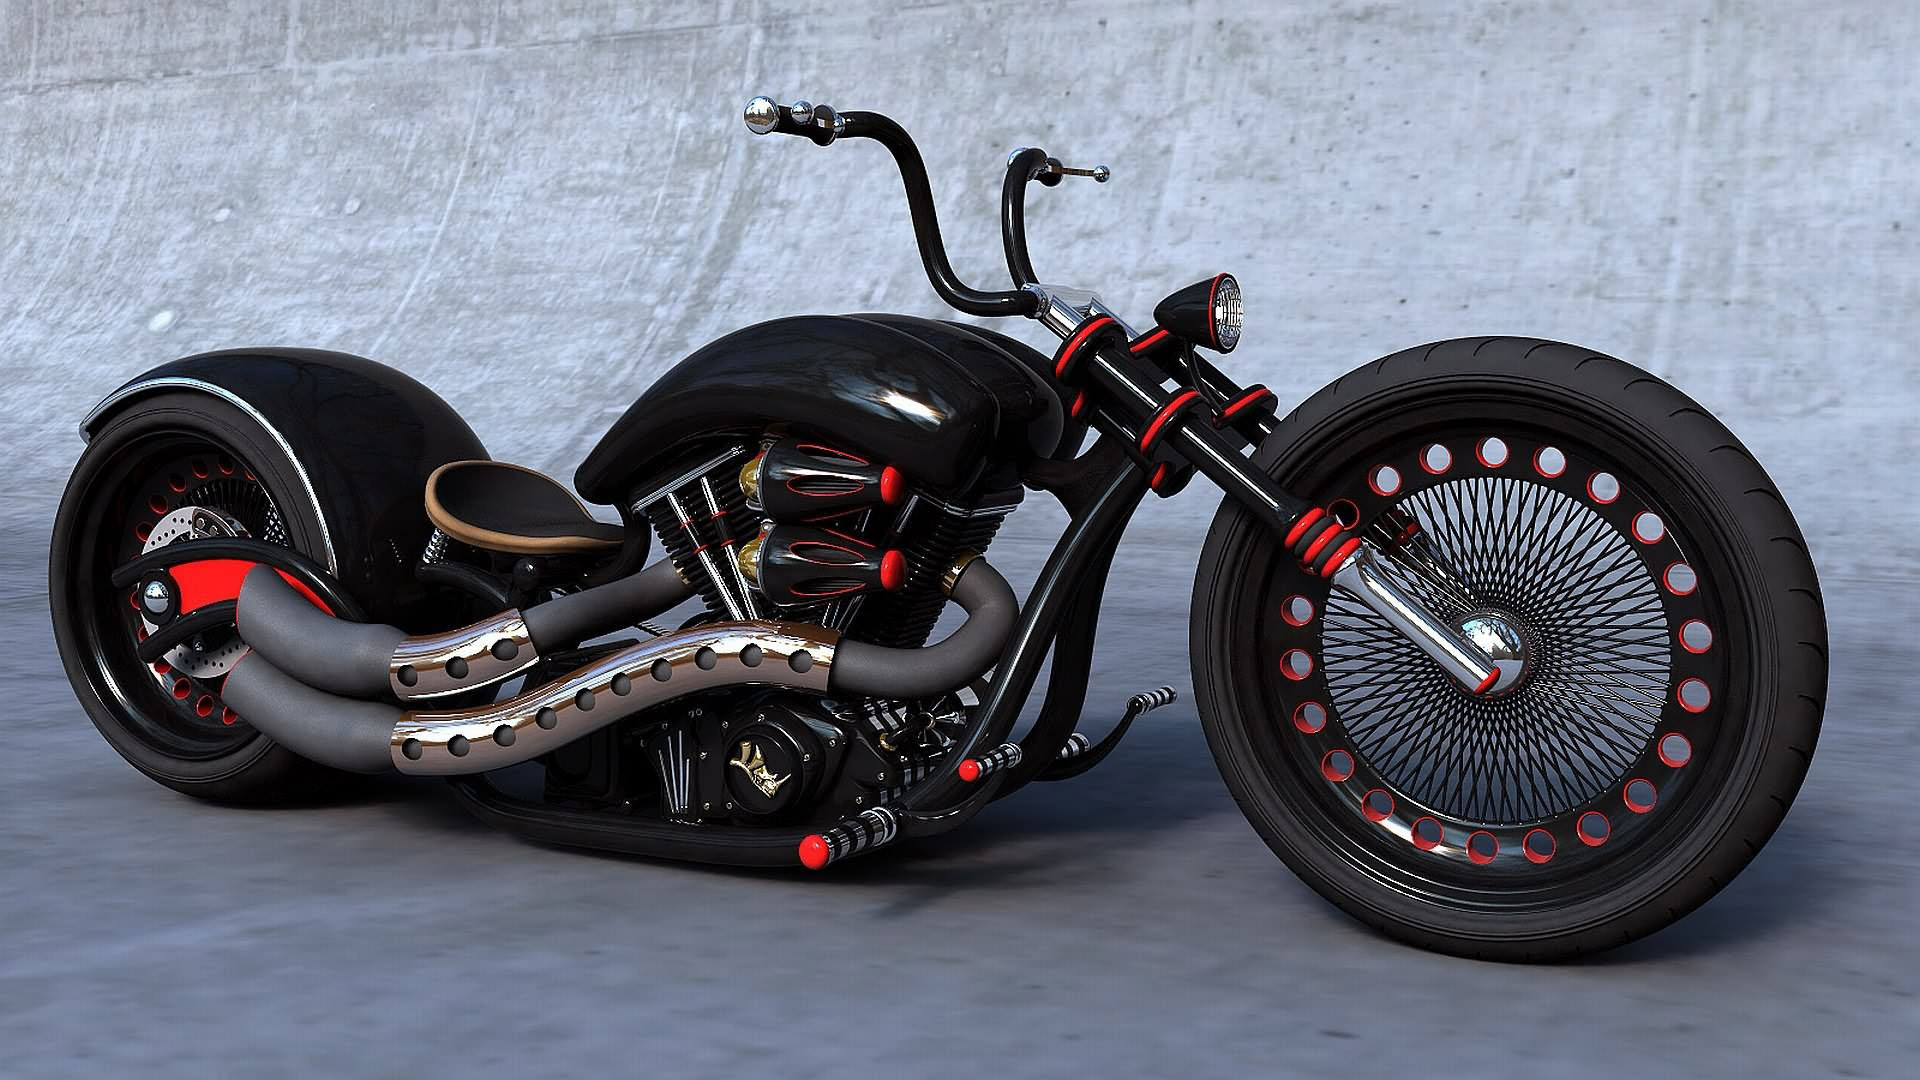 1920x1080 cool, chopper, wallpaper, black, motorcycle, goodwp, motorcycles .